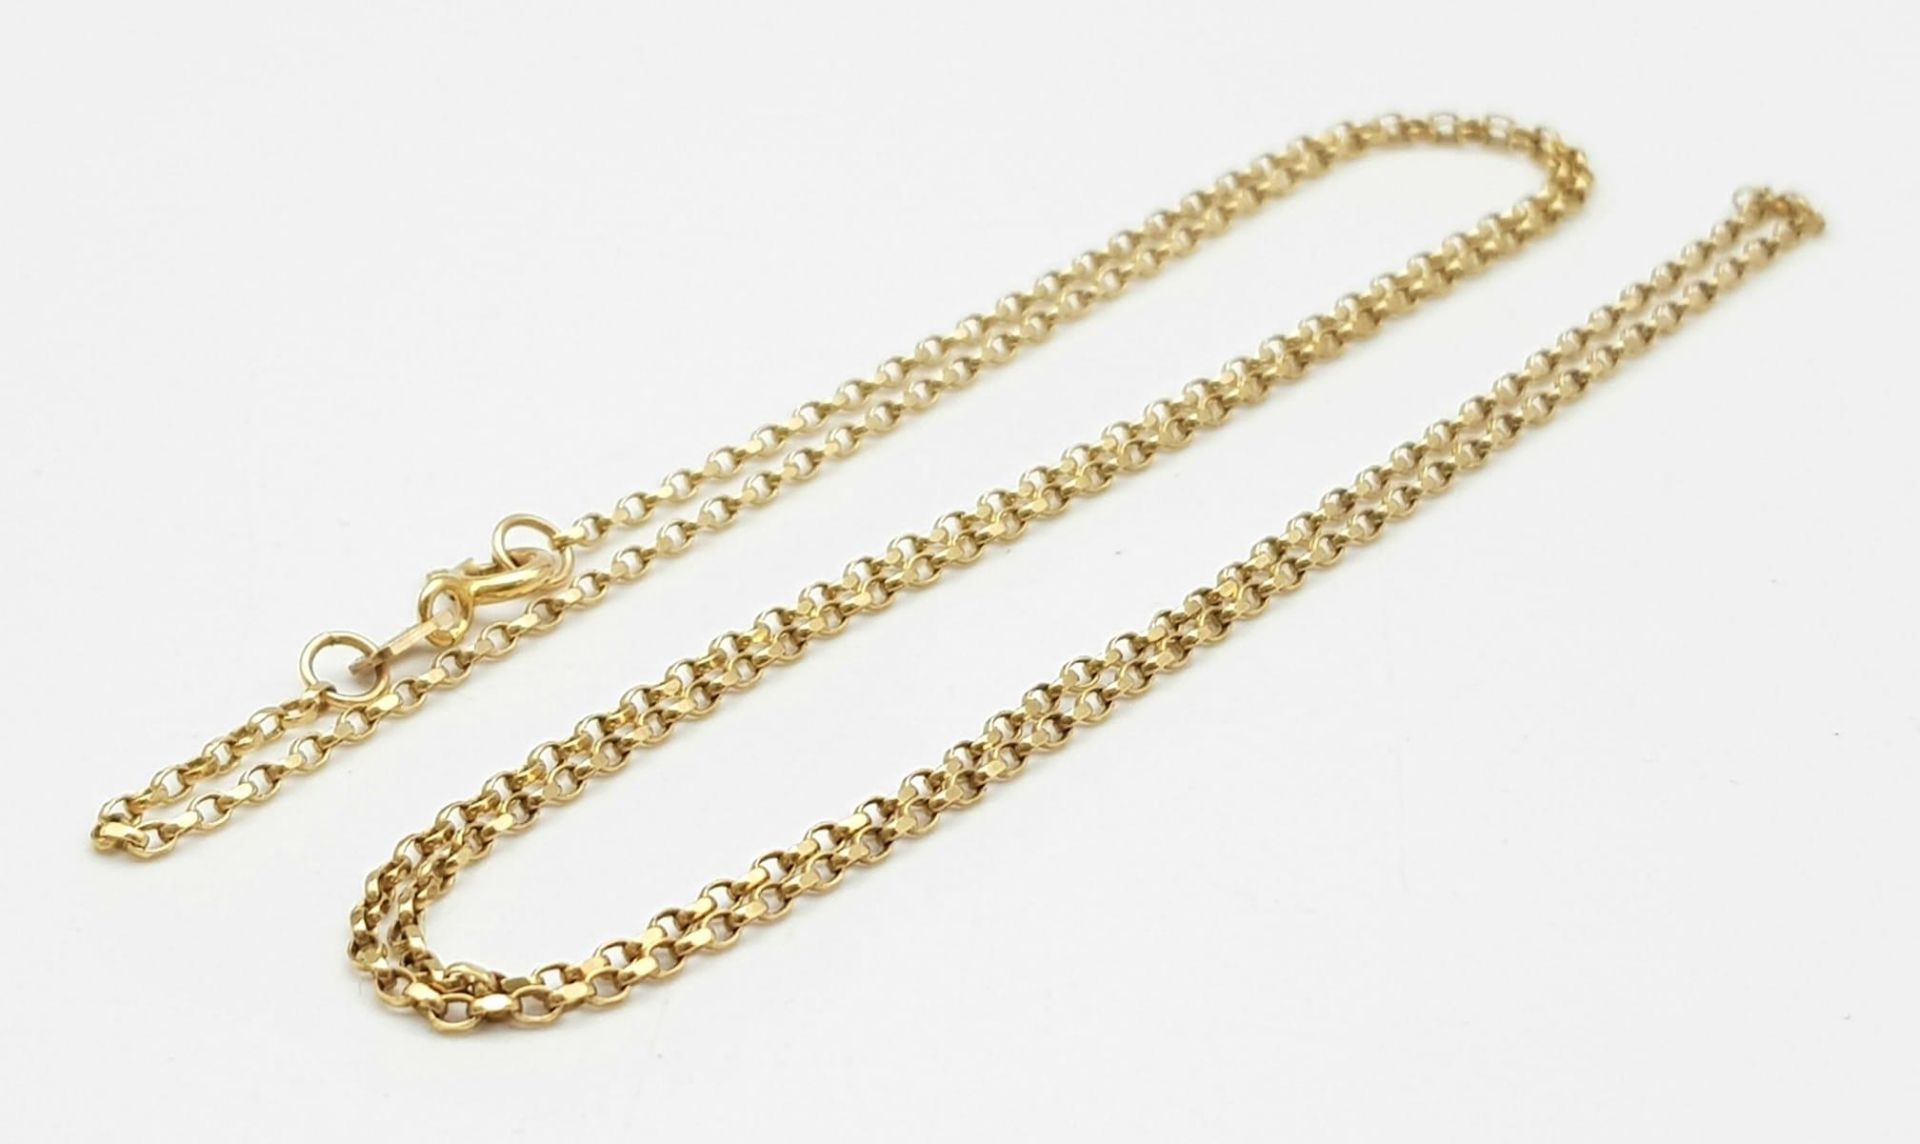 A Vintage 9K Yellow Gold Delicate Necklace. 60cm. 2.9g weight.